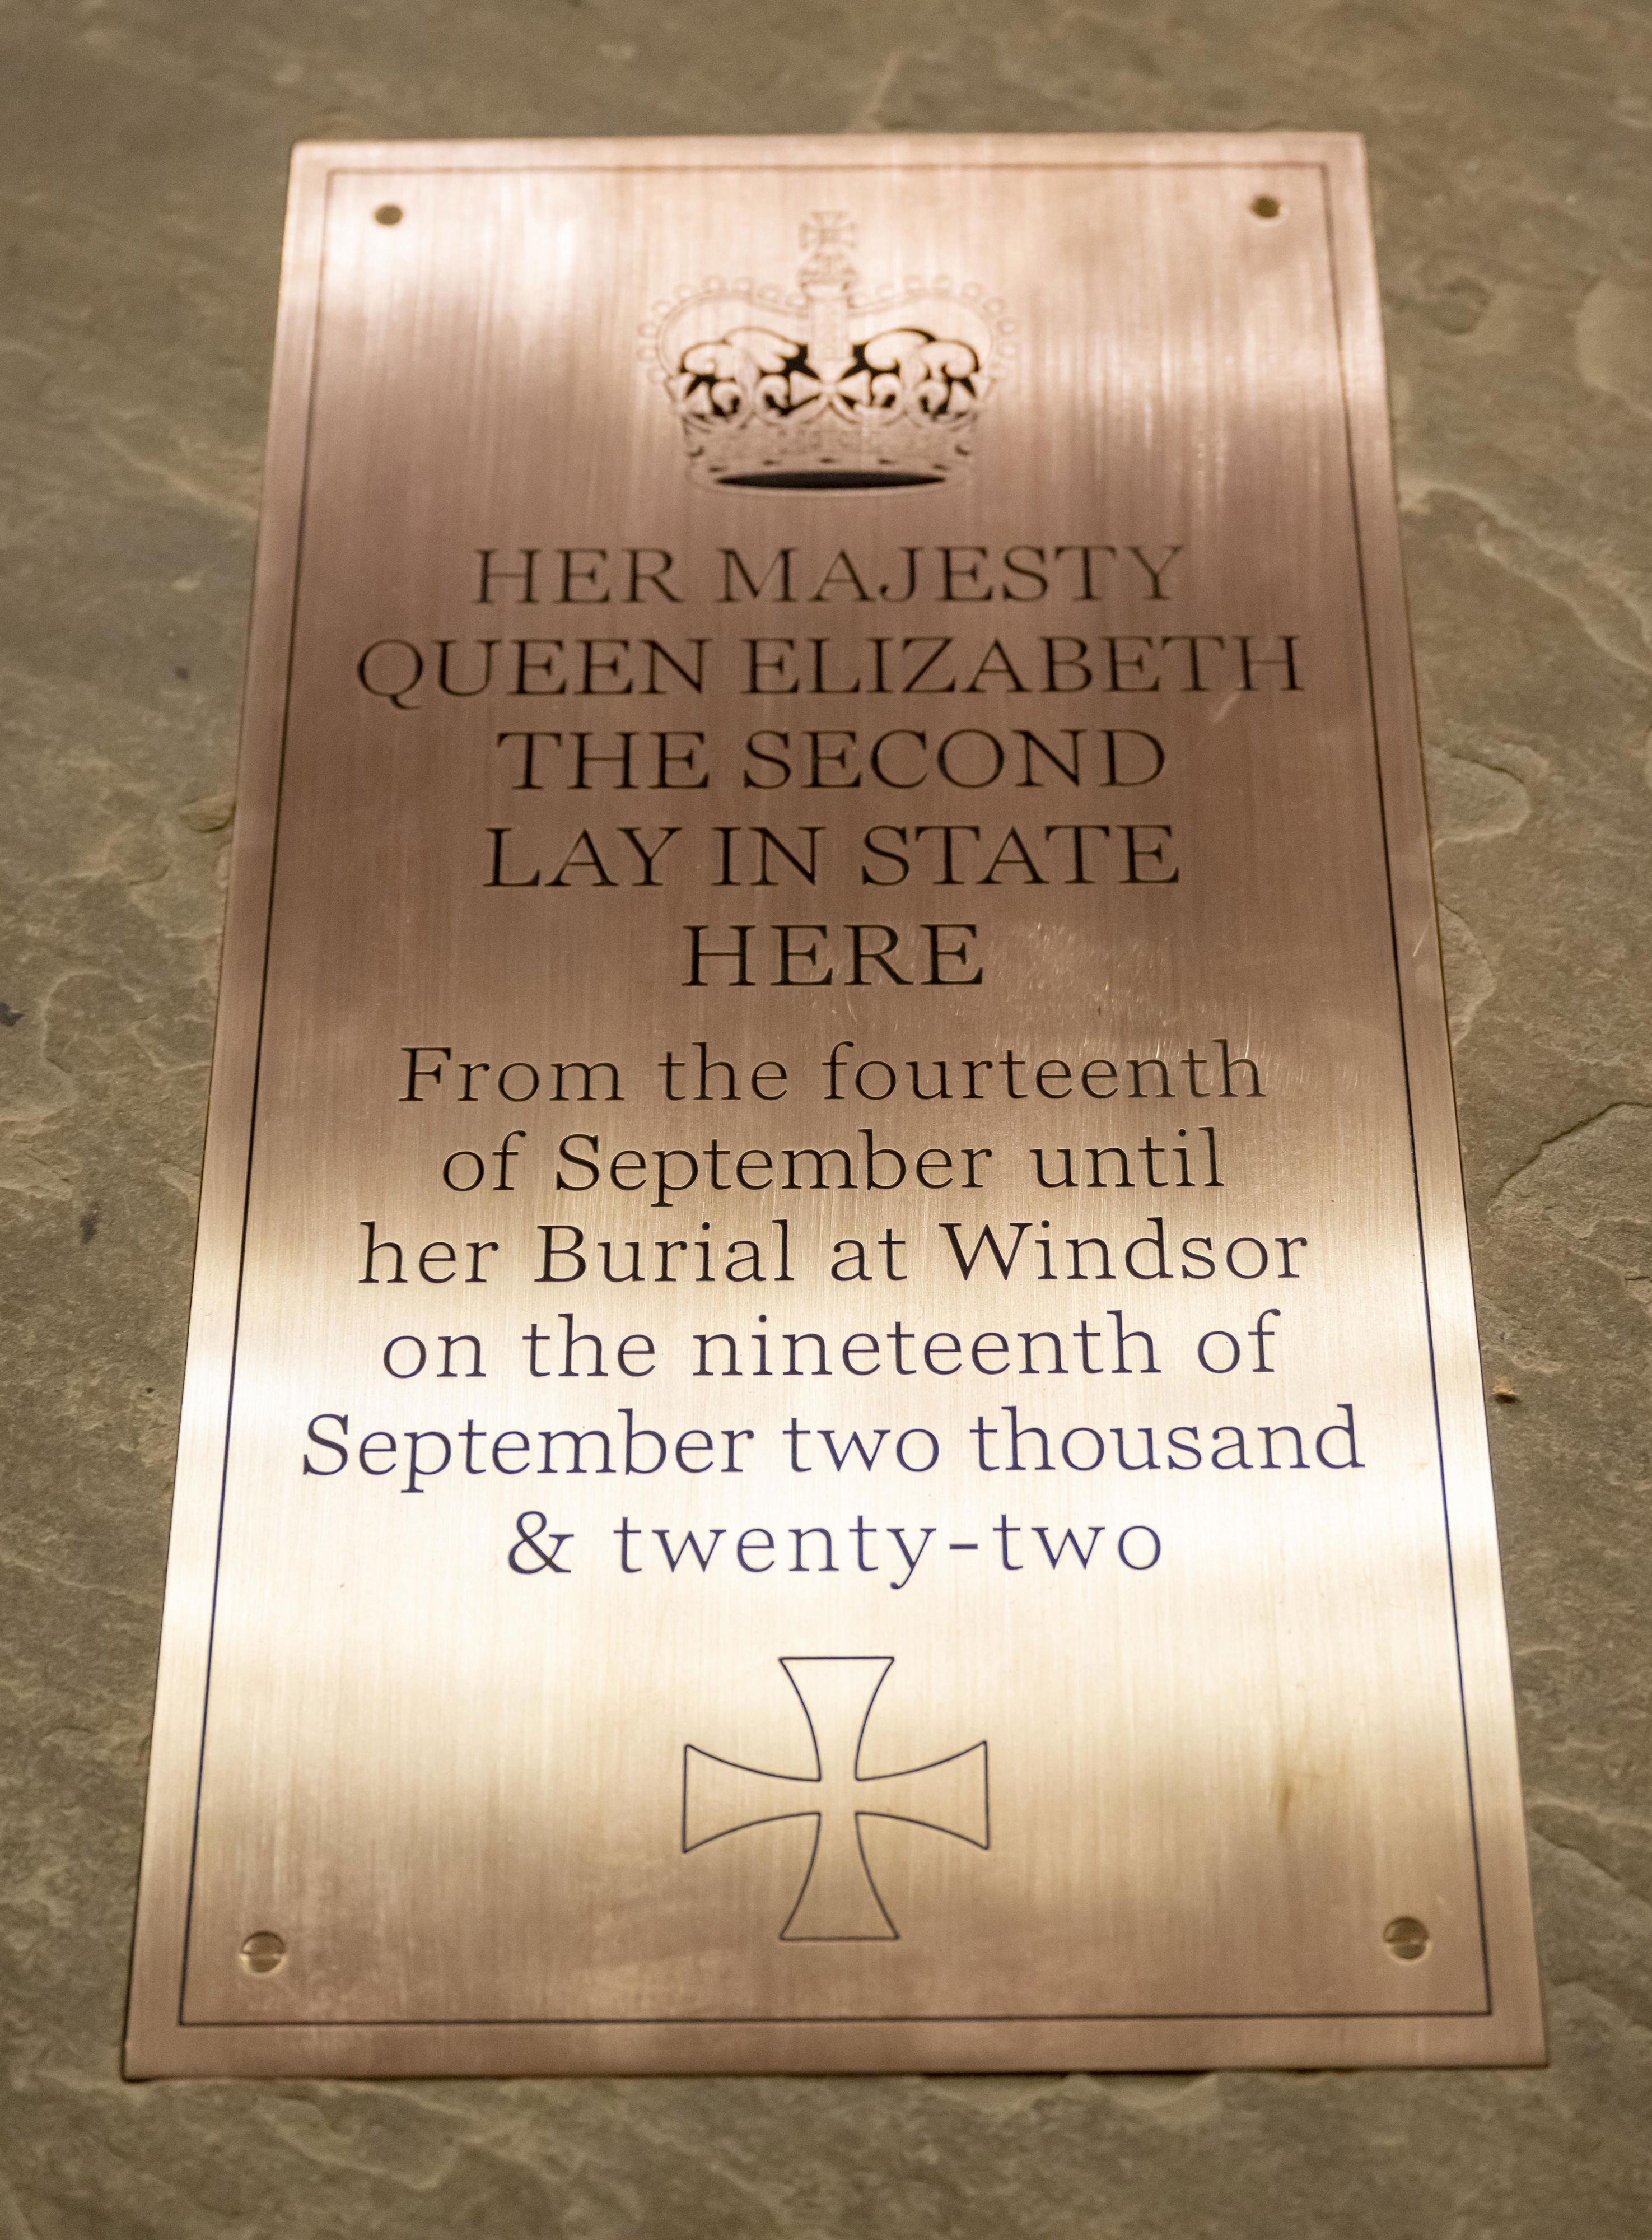 <p>A new plaque commemorating Queen Elizabeth II lying in state in Westminster Hall in London was visited by King Charles III on Dec. 14, 2022, three months after her death.</p>